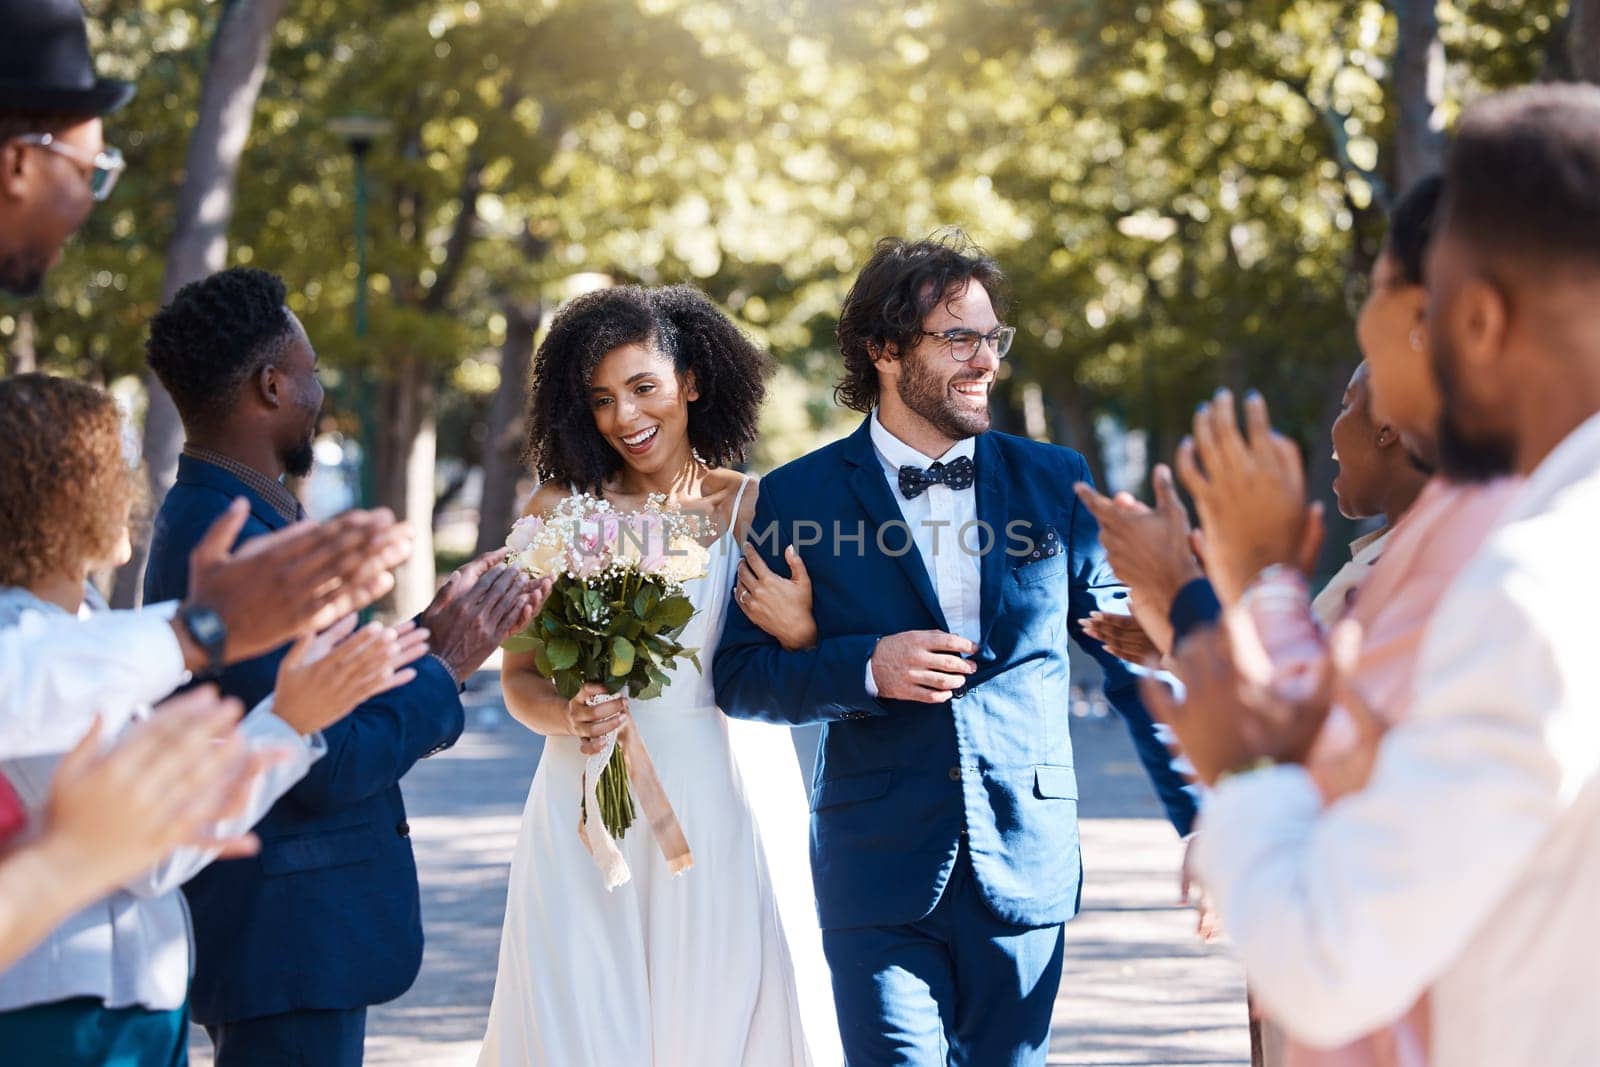 Happy celebration and clapping for couple at wedding with excited, joyful and cheerful crowd of guests. Interracial love and partnership of people at marriage event with applause and smile by YuriArcurs